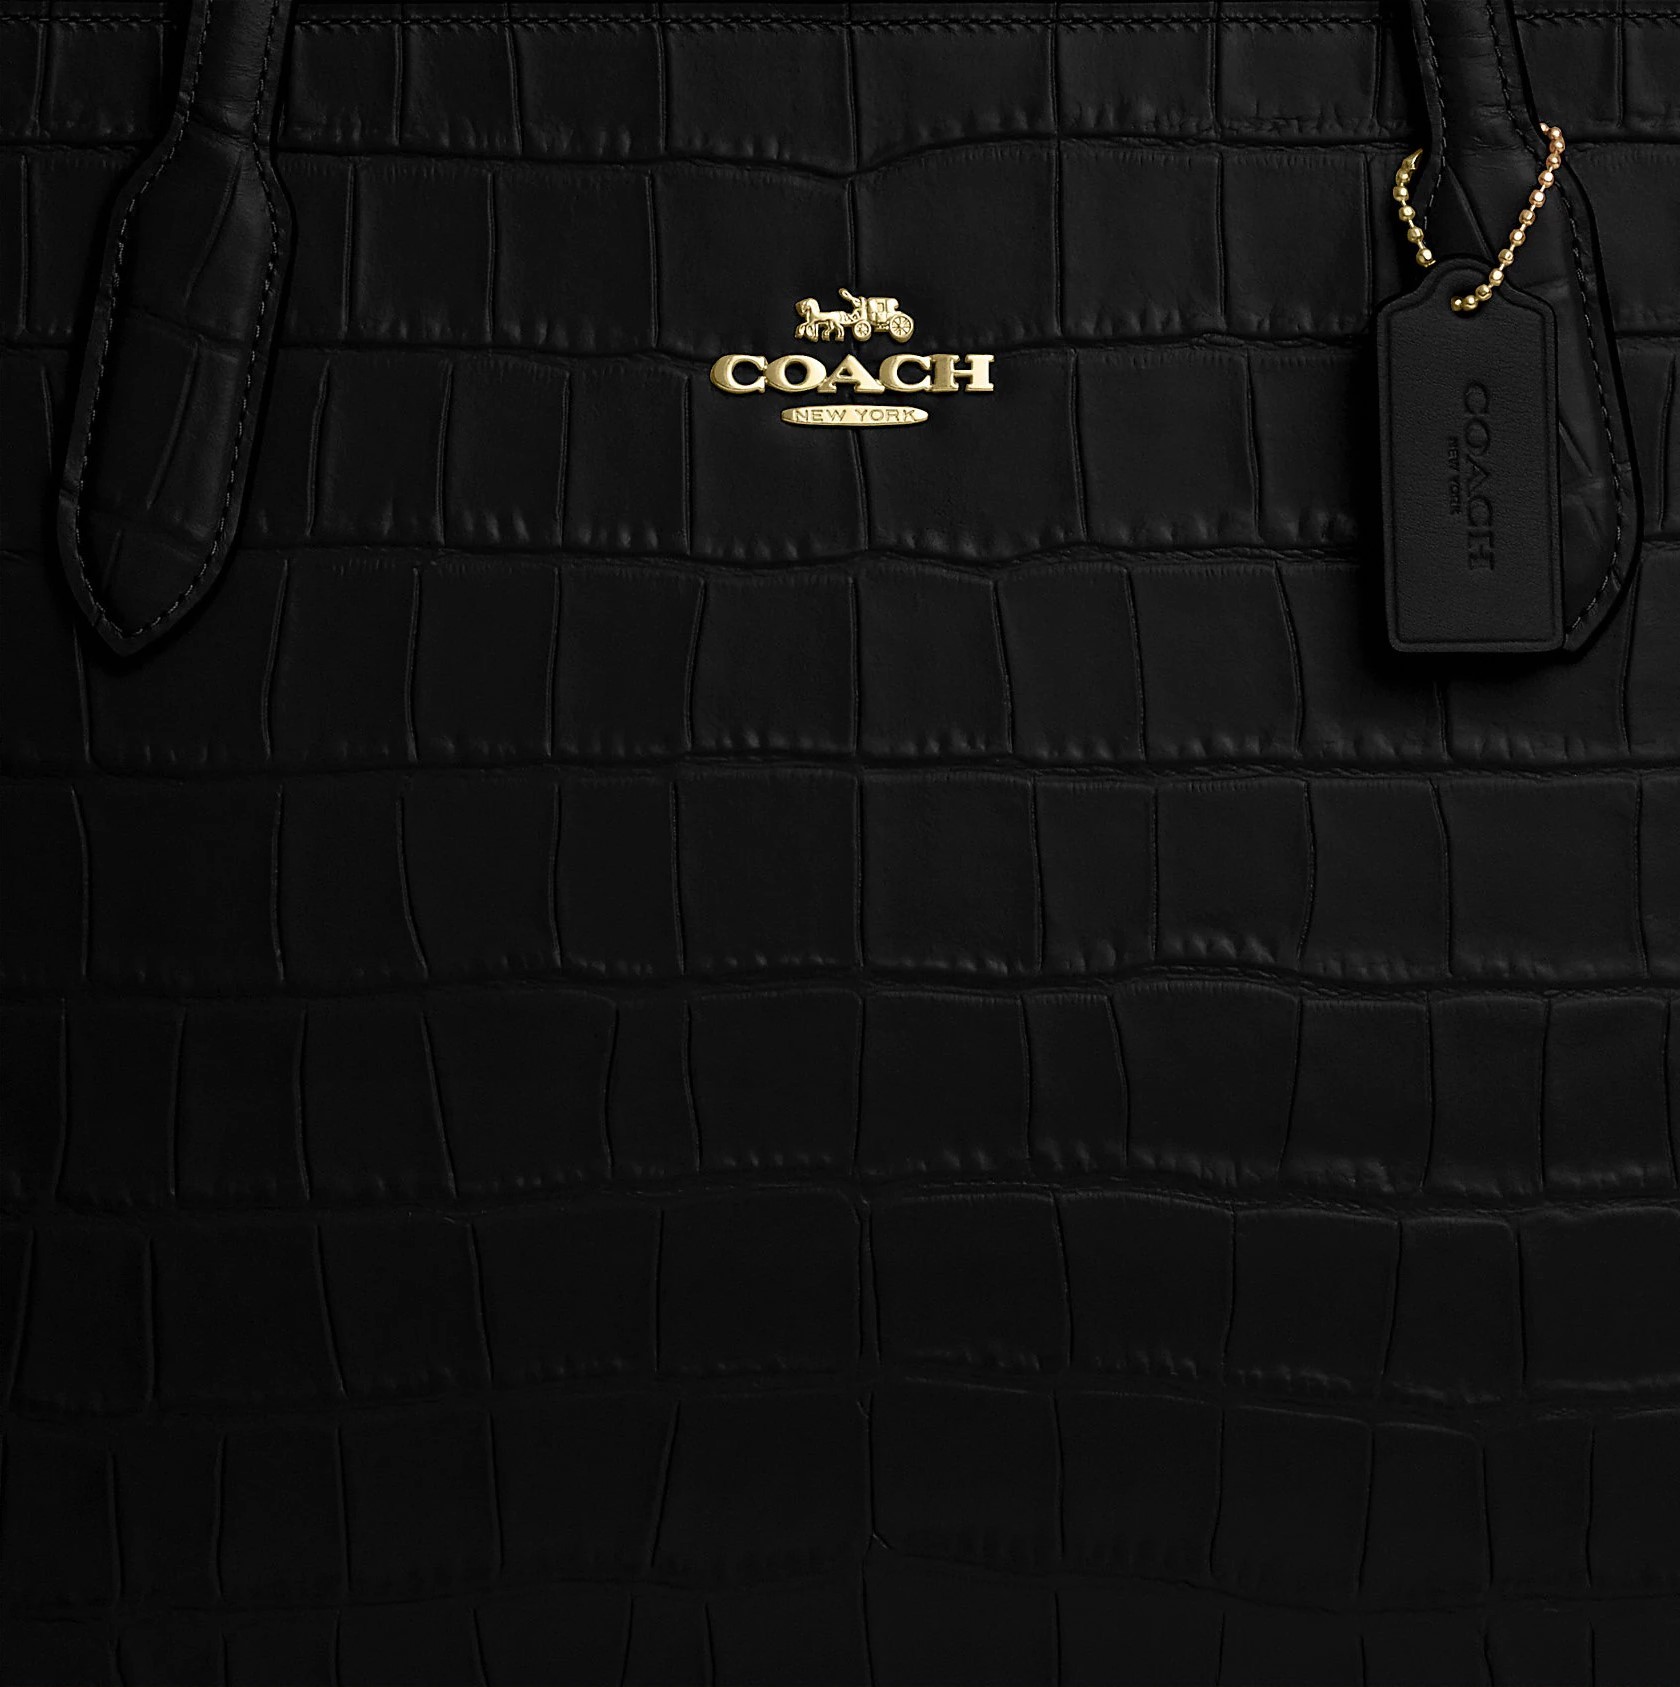 TÚI XÁCH COACH NỮ NINA TOTE CROCODILE-EMBOSSED LEATHER AND SMOOTH LEATHER BAG IN GOLD BLACK CL654 3